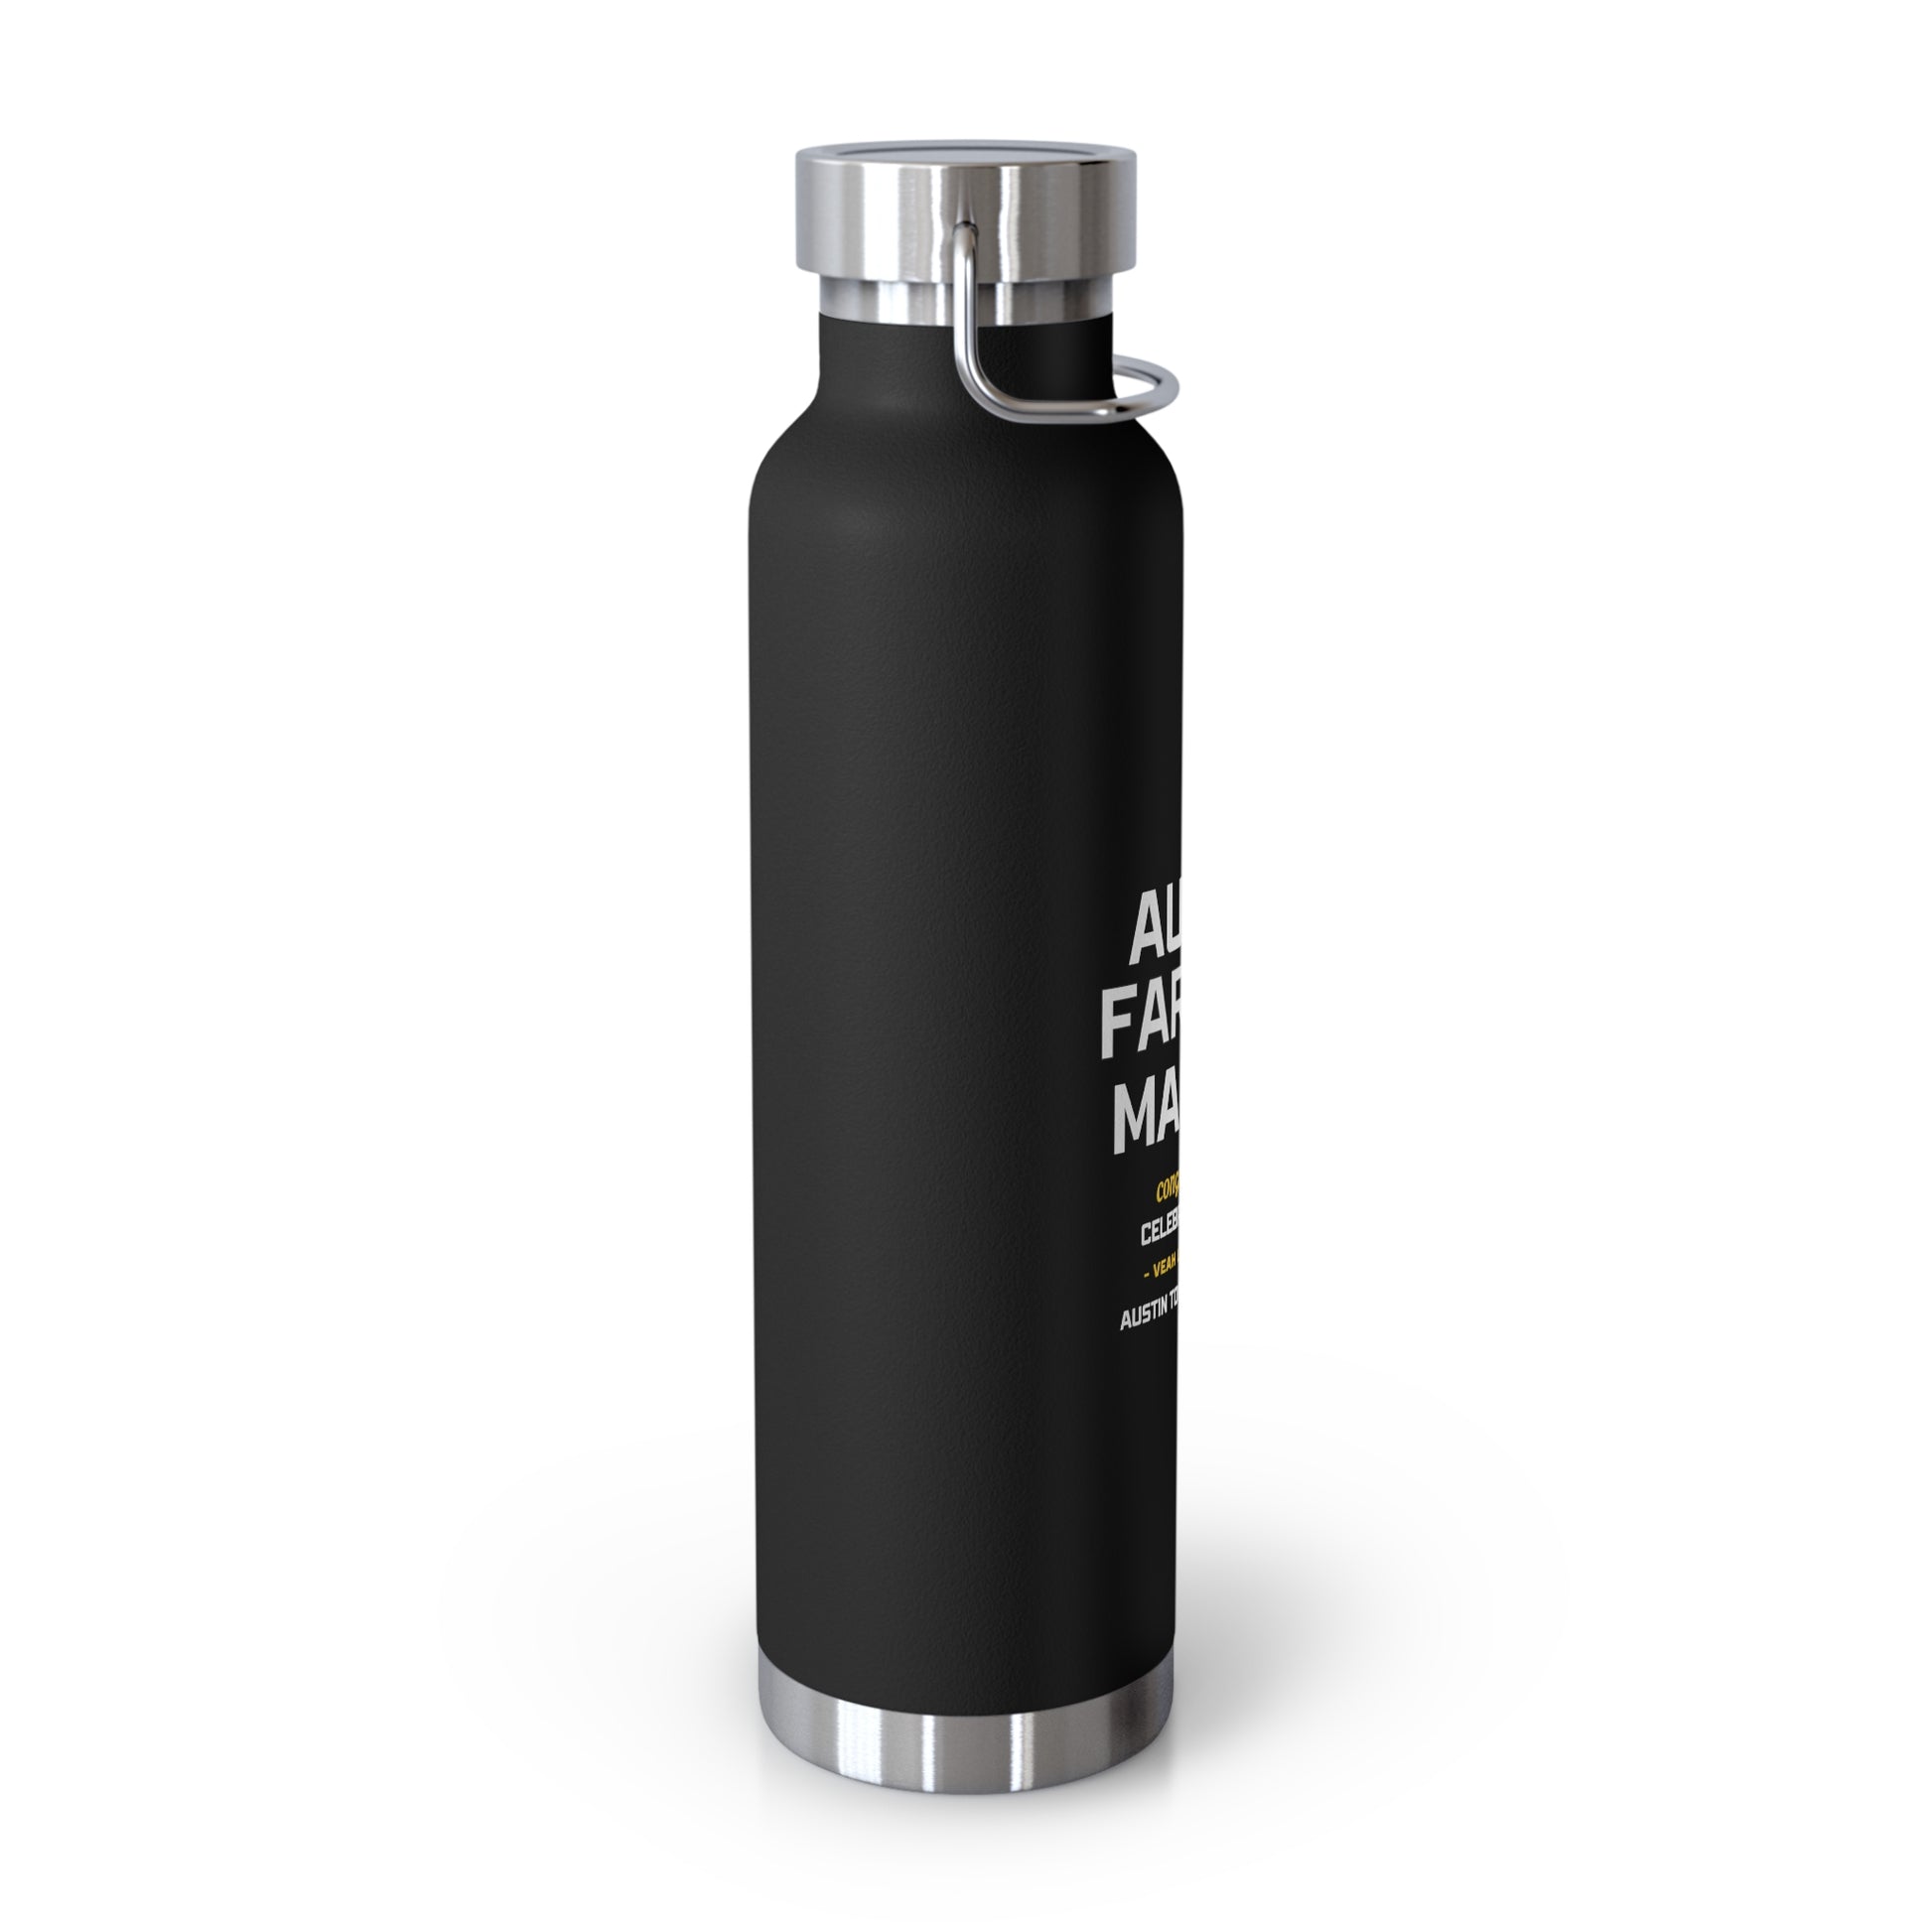 AUSTIN TOWN HALL MANAGER 1 YEAR CELEBRATION 22oz Vacuum Insulated Bottle - AH VISION